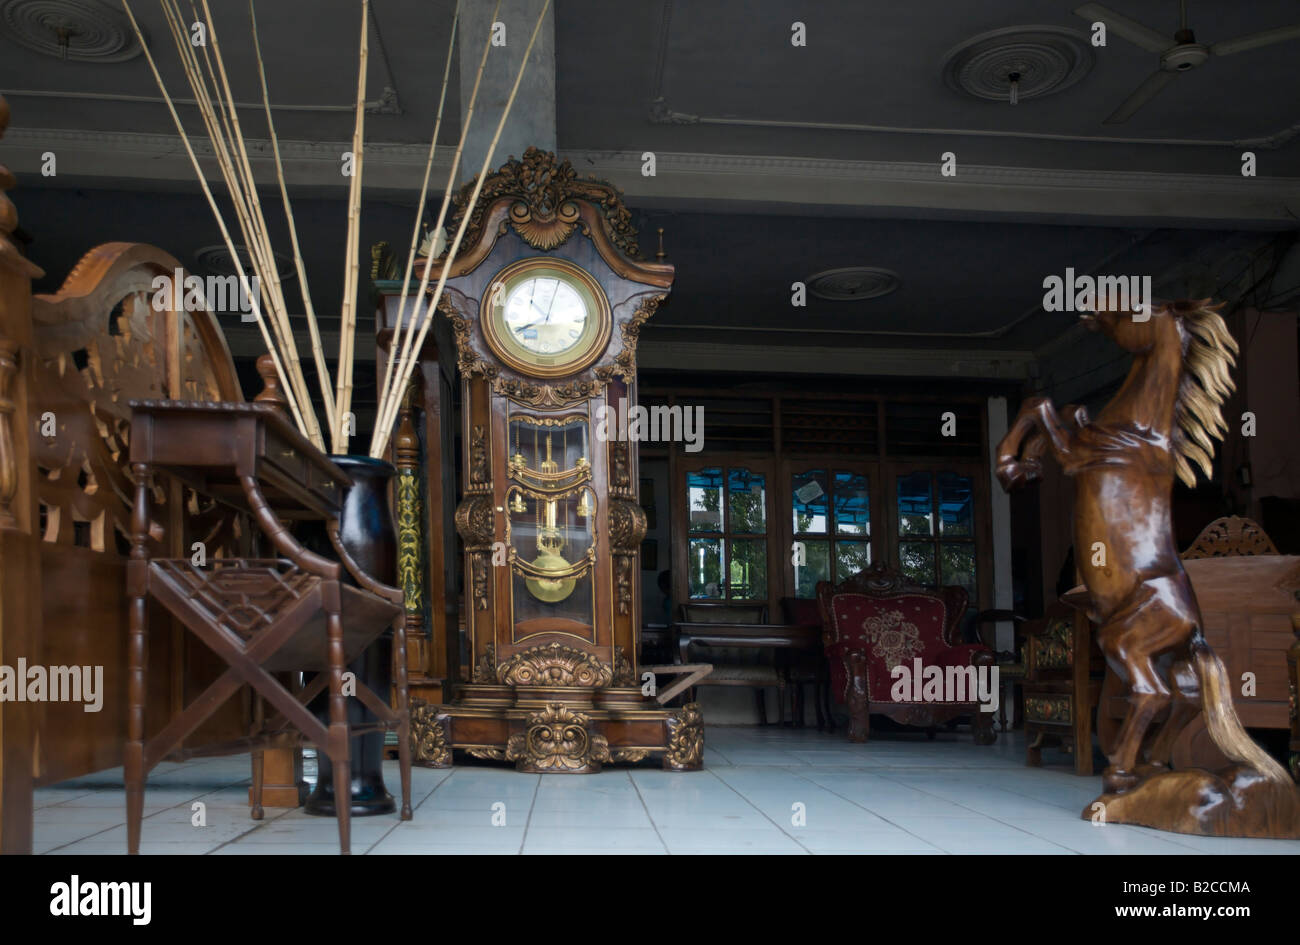 New grandfather clock made in Jepara, Central Java, Indonesia Stock Photo